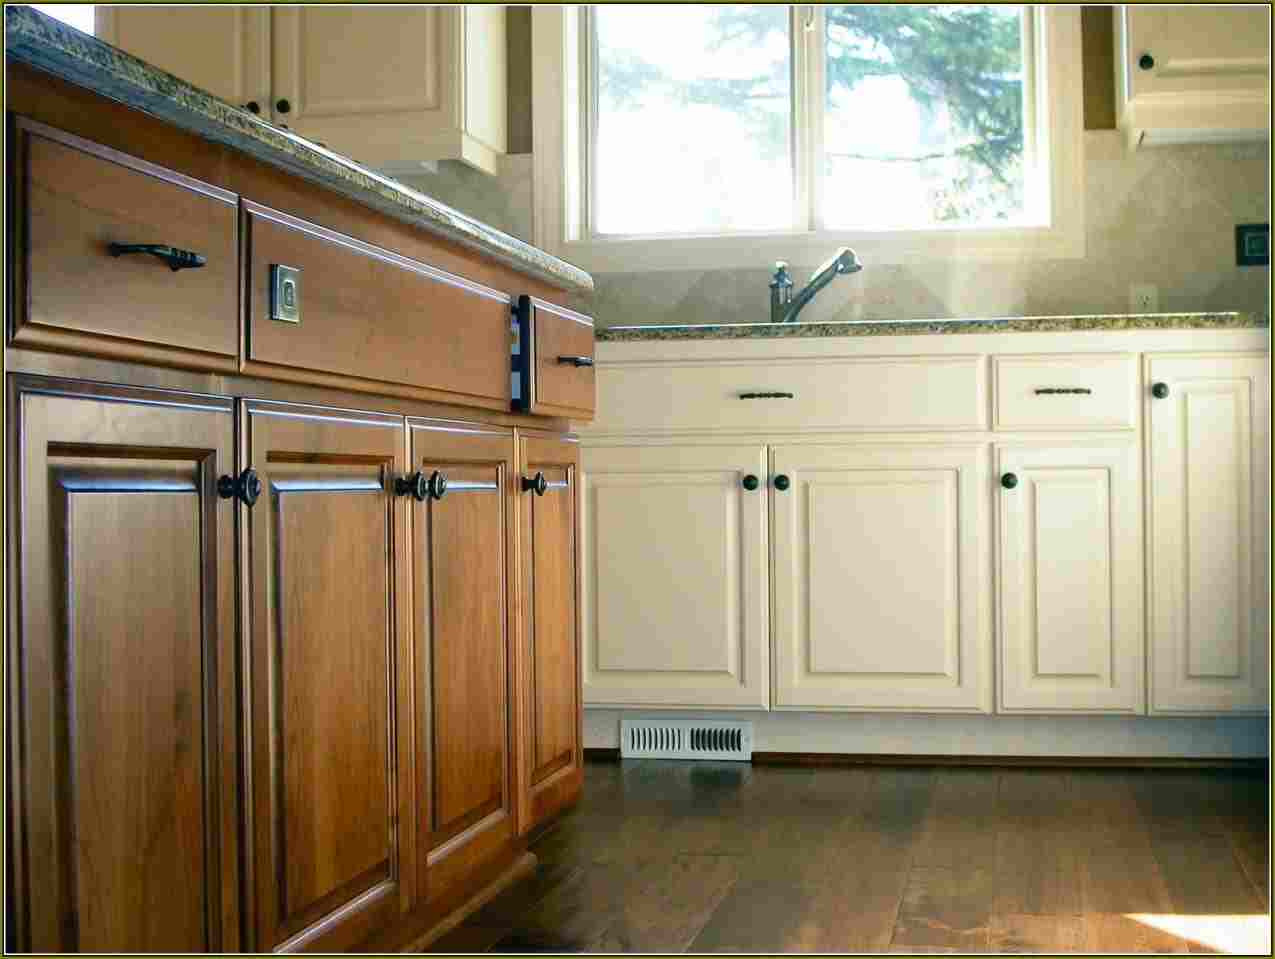 30 Awesome Hardwood Floor Refinishing Fairfield Ct 2024 free download hardwood floor refinishing fairfield ct of back stage with kim part 4 intended for outlets in hbe rhhomesbyemmanuelcom creative home design image rhadsynercom kitchen used kitchen cabinets i